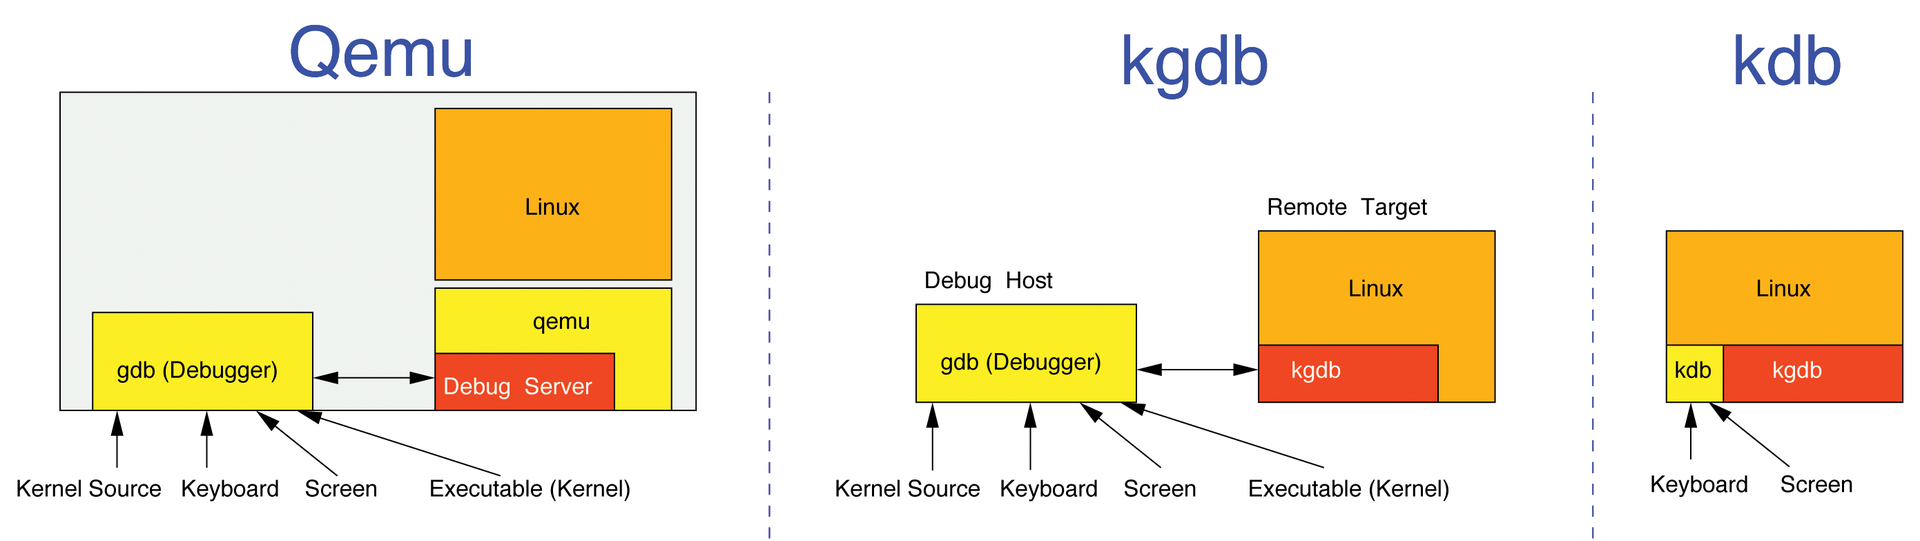 Linux offers a variety of options for debugging kernel and module code in the form of the Qemu emulator, kgdb, and kdb. 